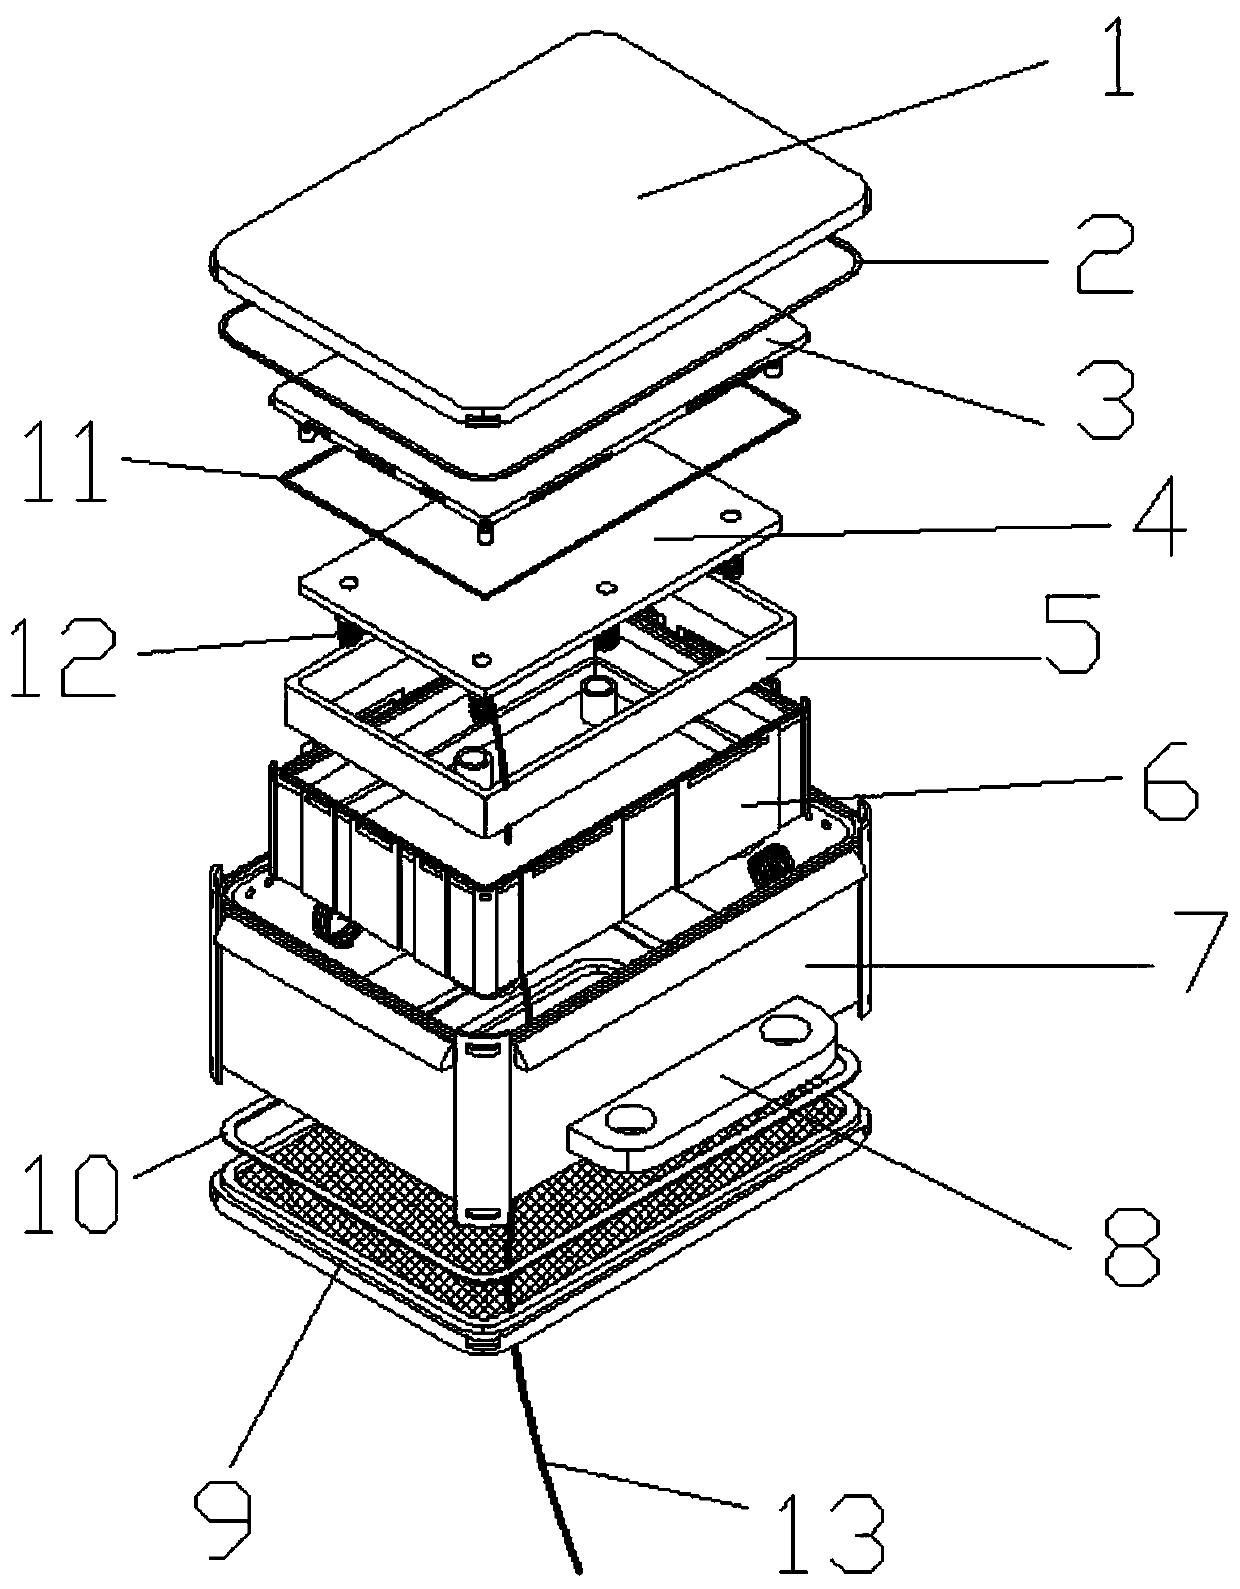 Waterproof and anti-collision structure arranged in automobile circuit board